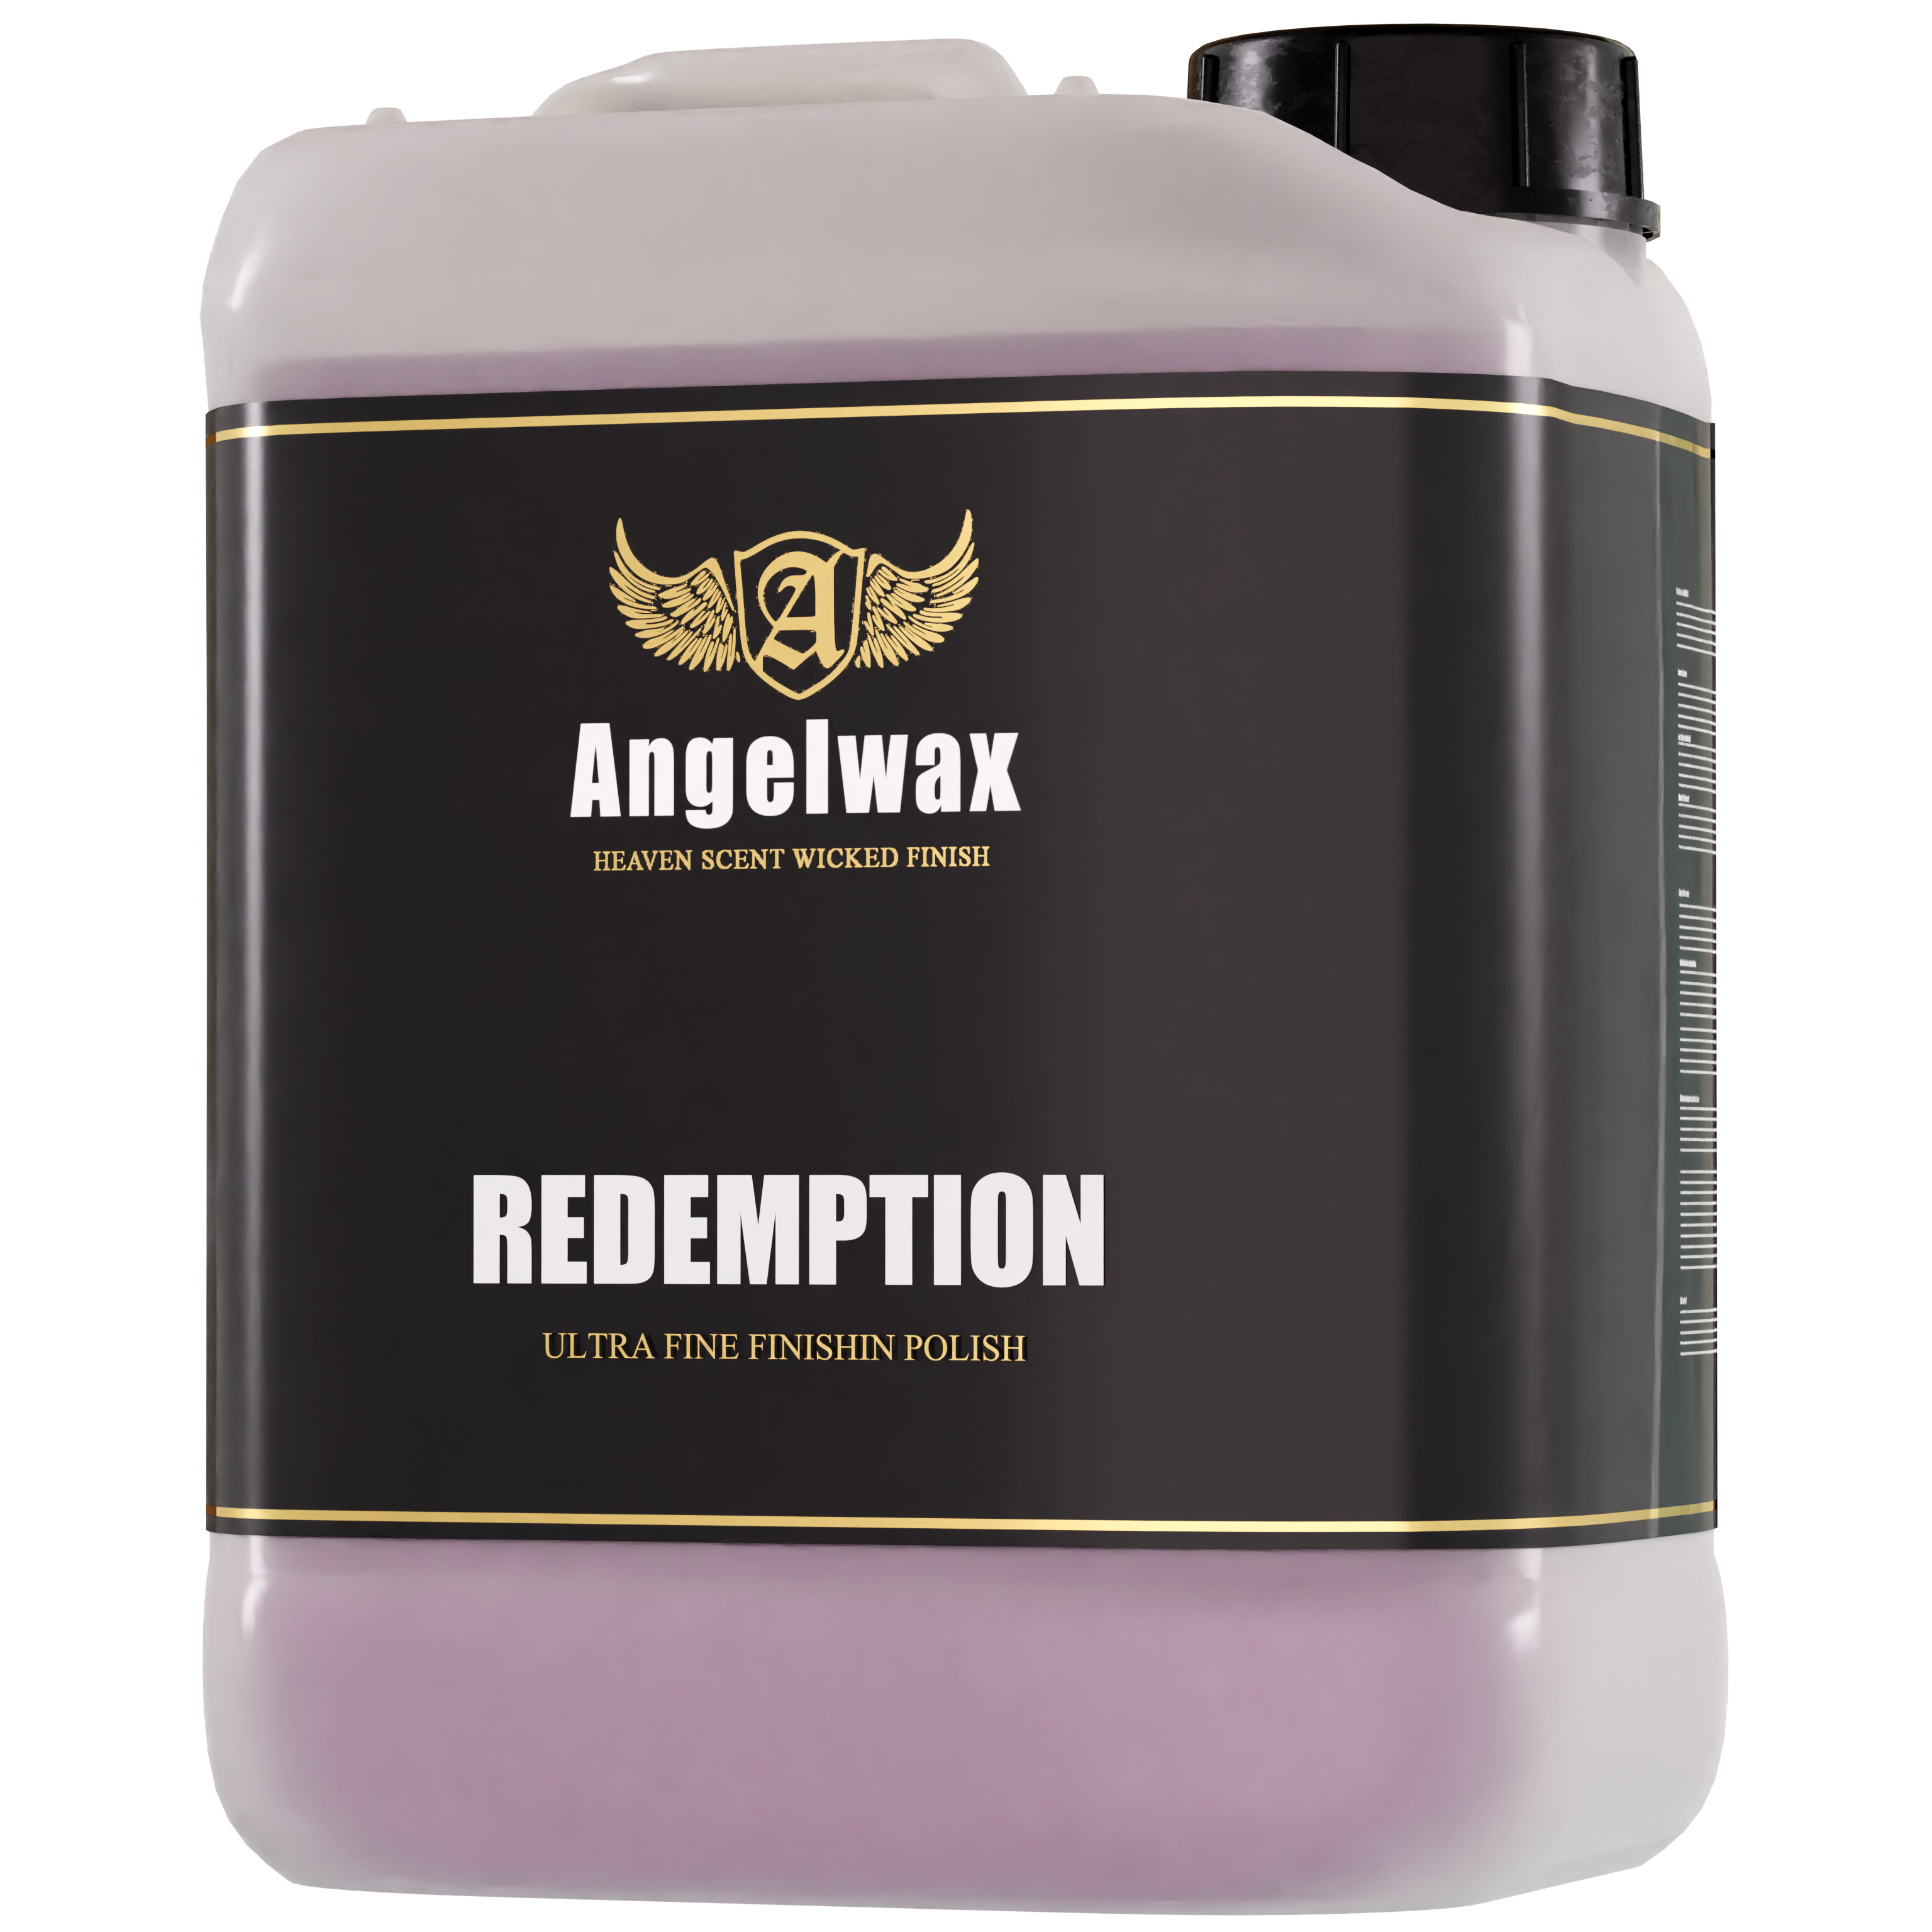 Angelwax Redemption | High Gloss Finishing Polish - Parks Car Care 